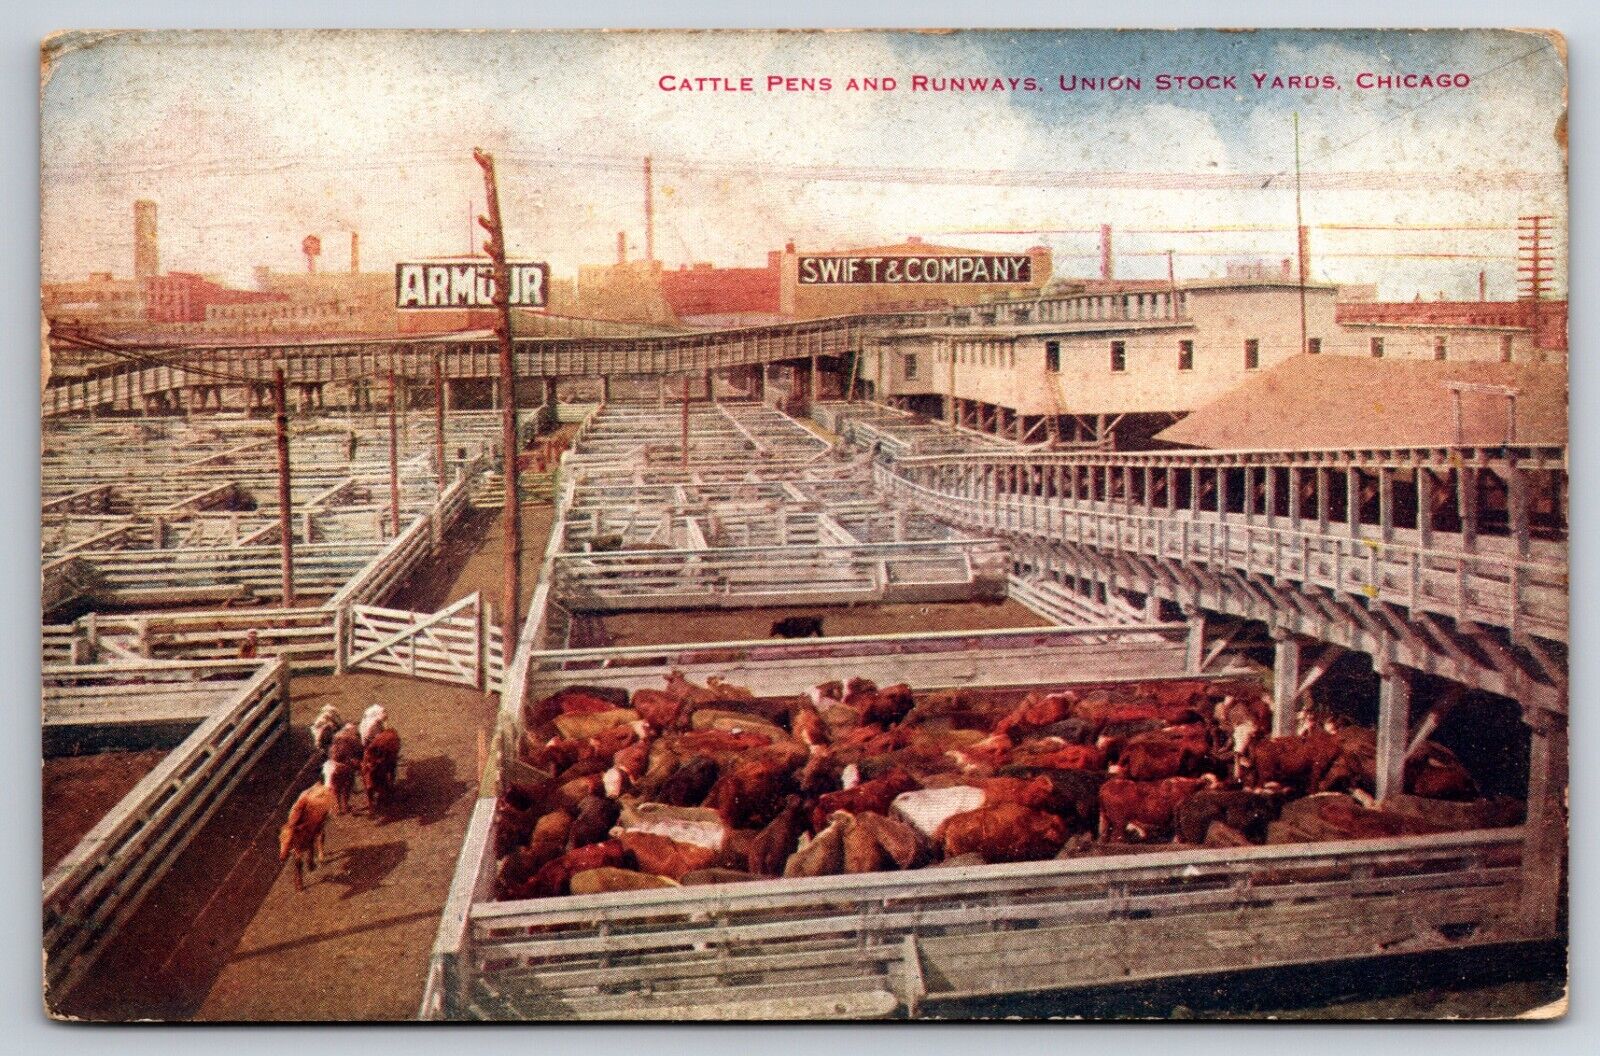 Union Stock Yards Cattle Pens Chicago Illinois IL c1918 Printed Postcard